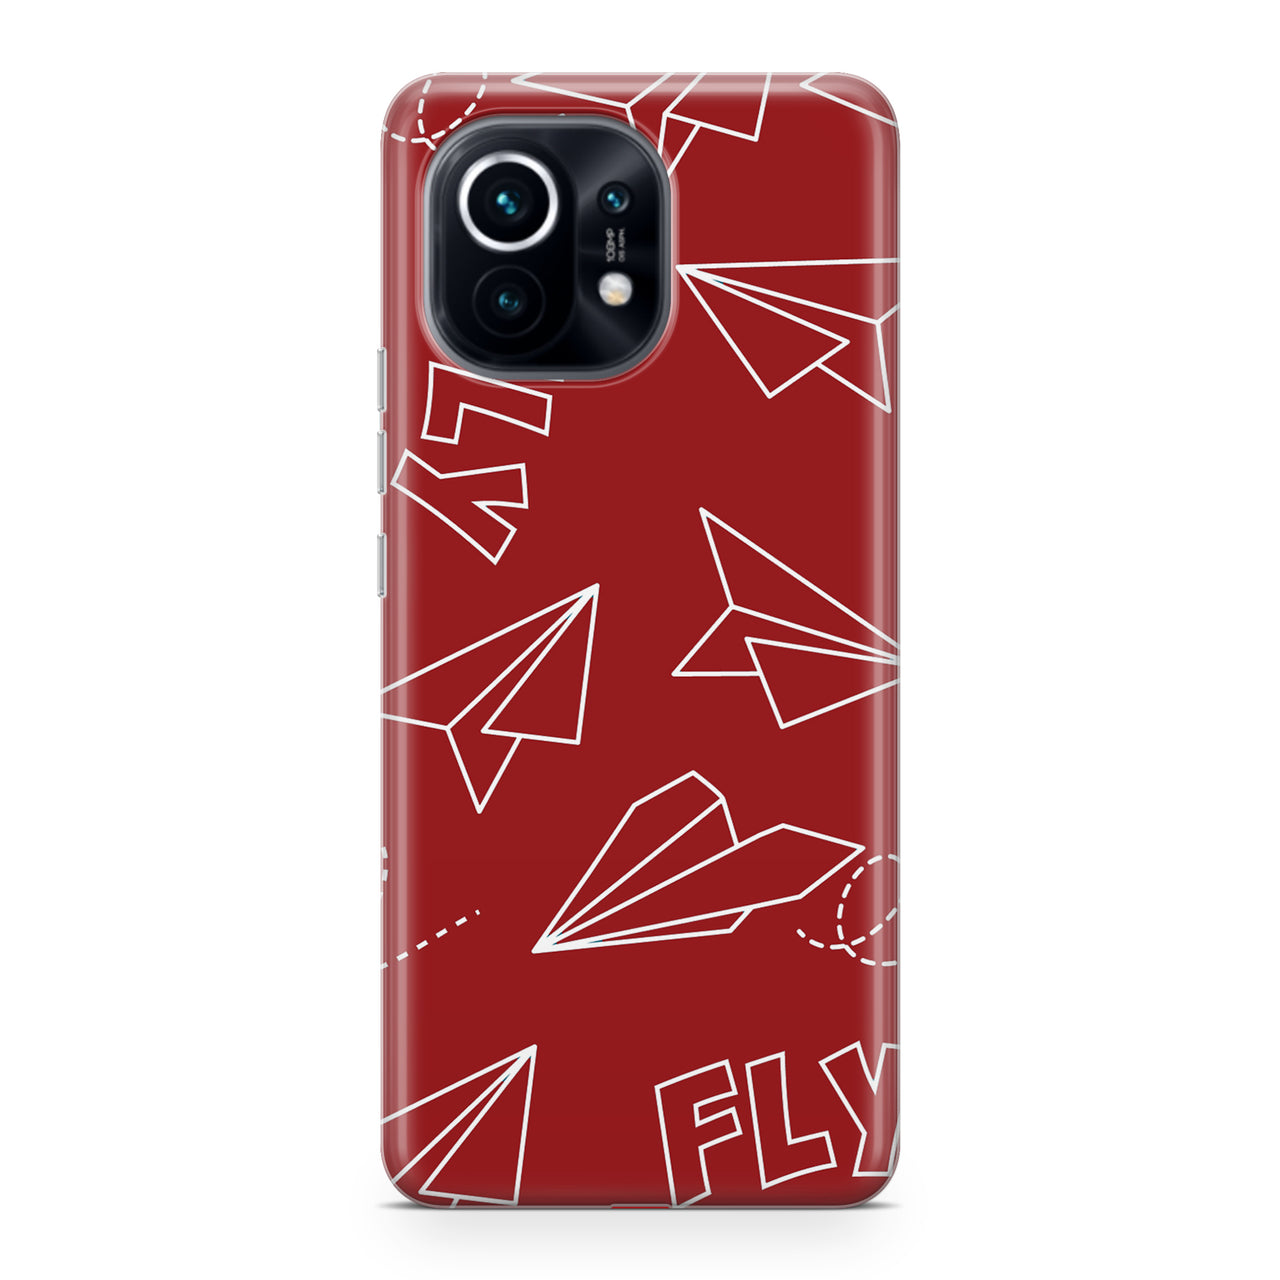 Paper Airplane & Fly-Red Designed Xiaomi Cases